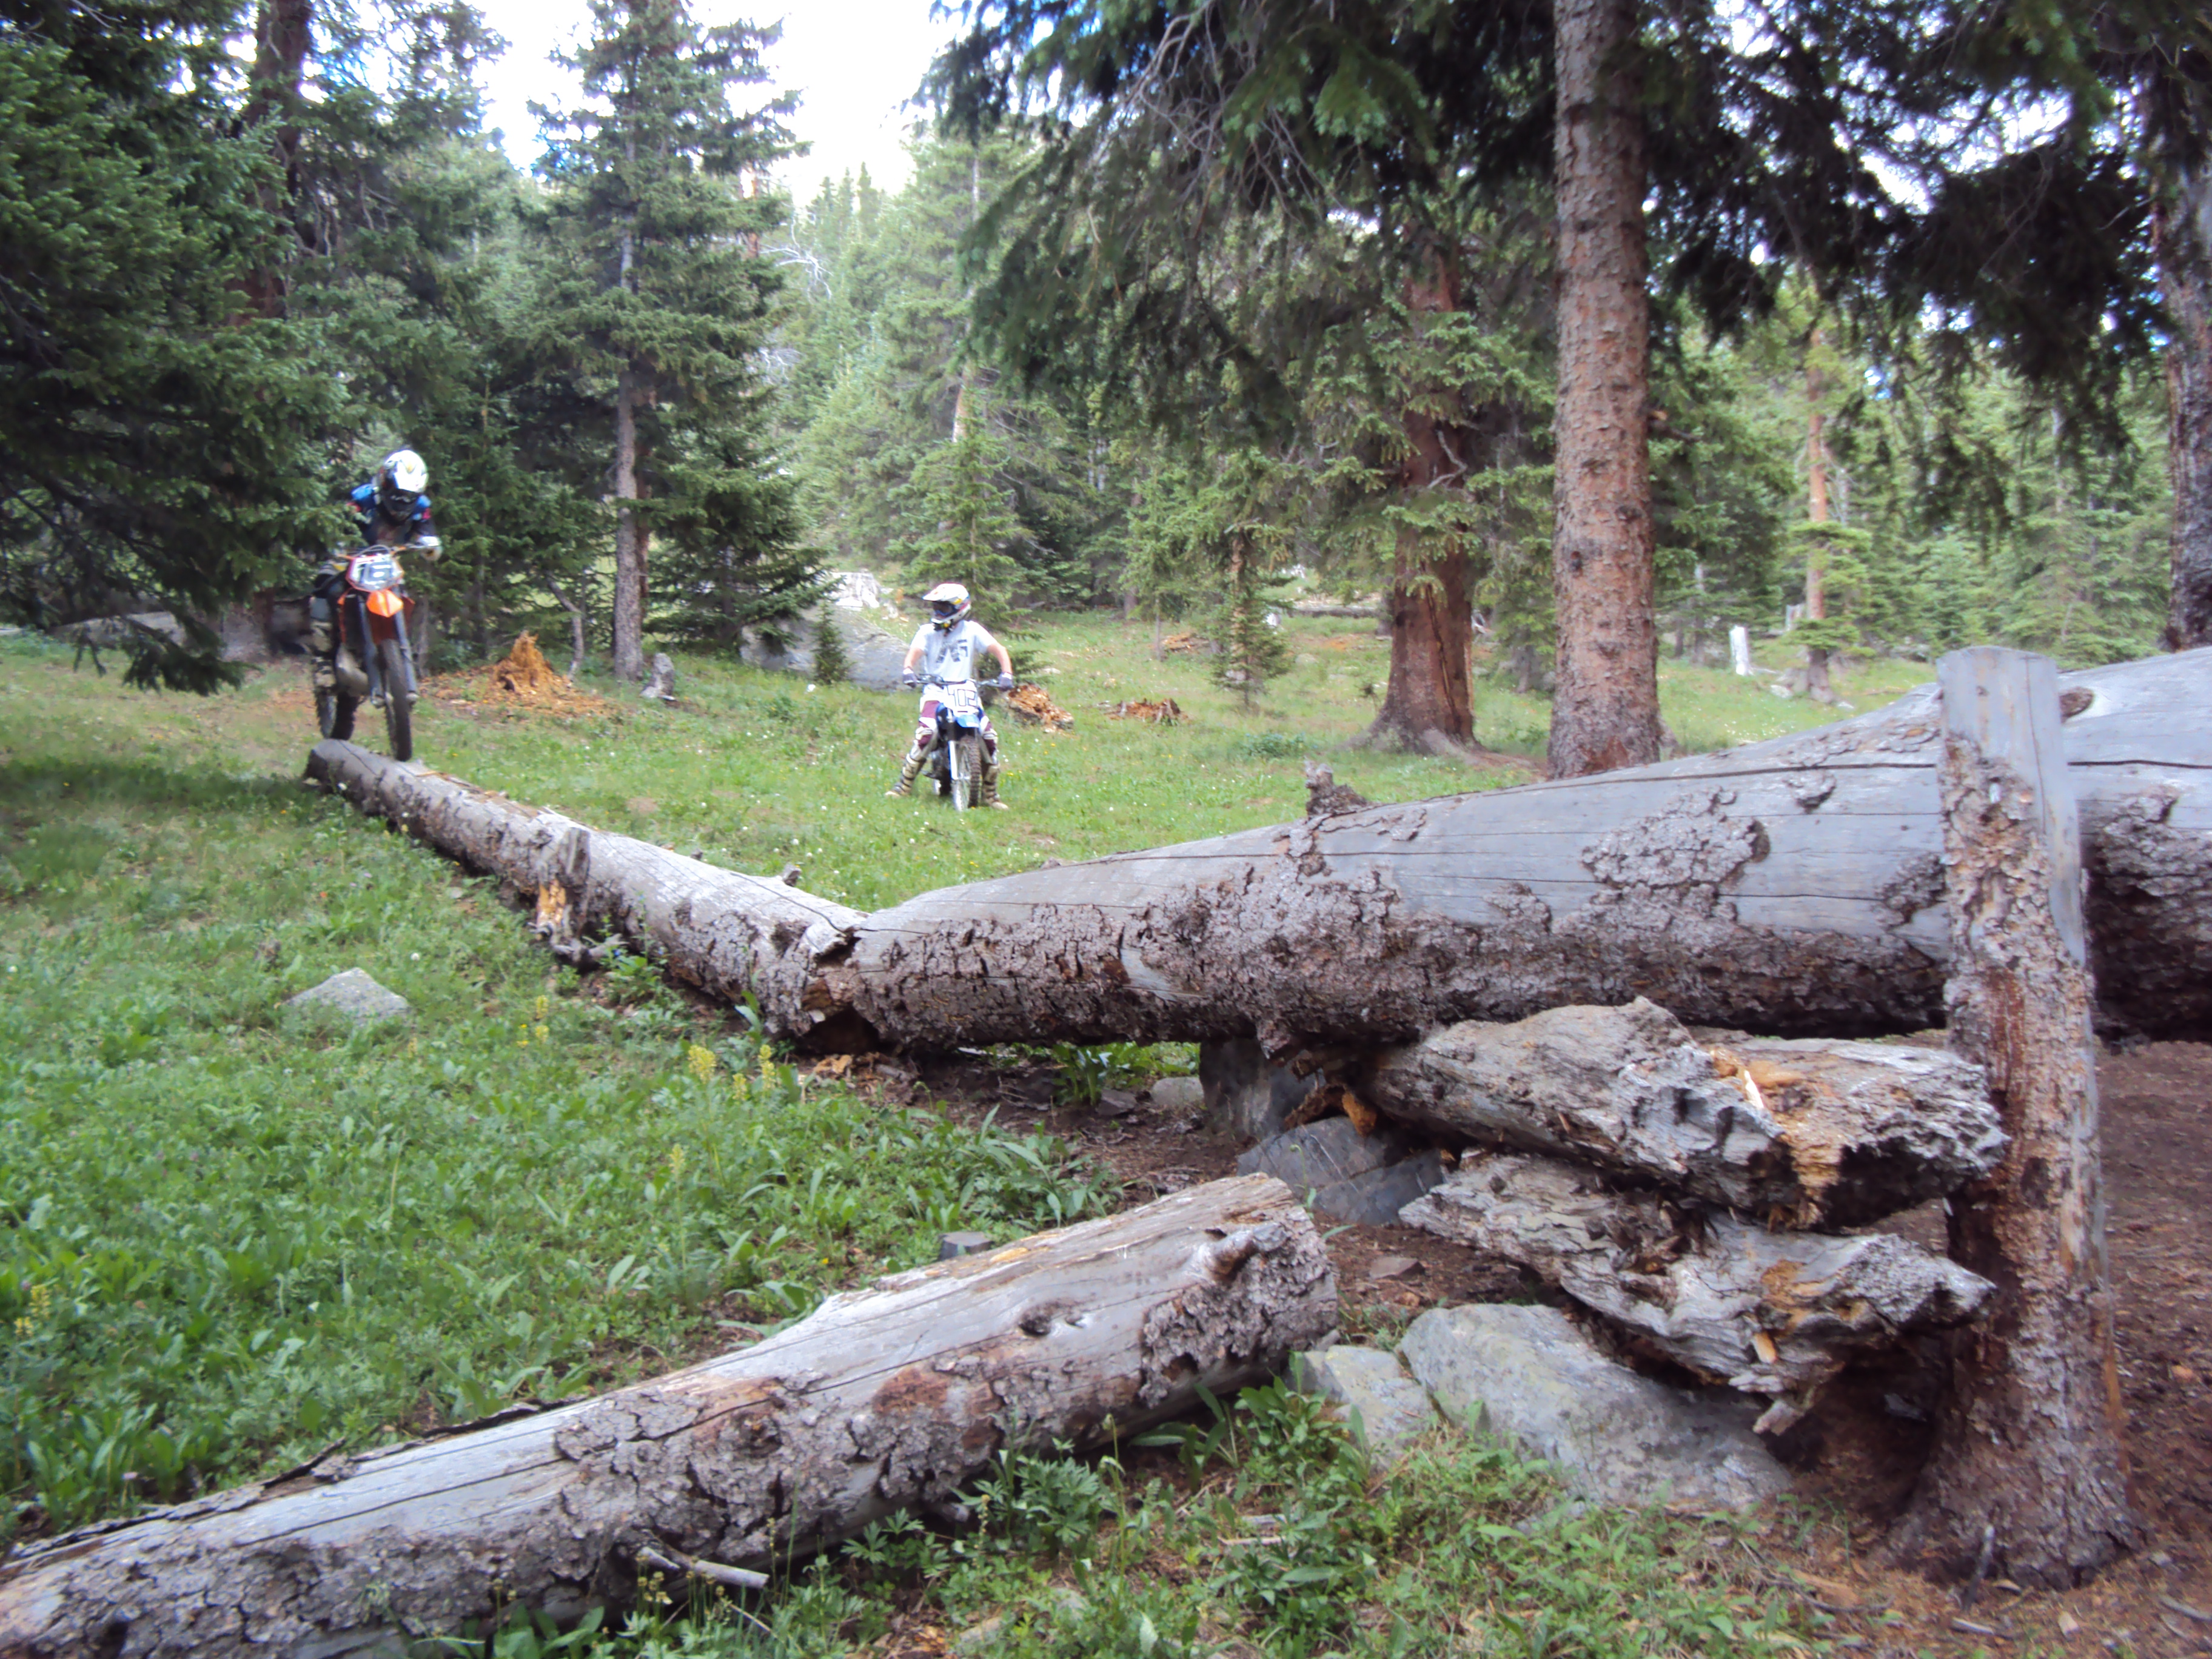 Fallen trees equal great log rides